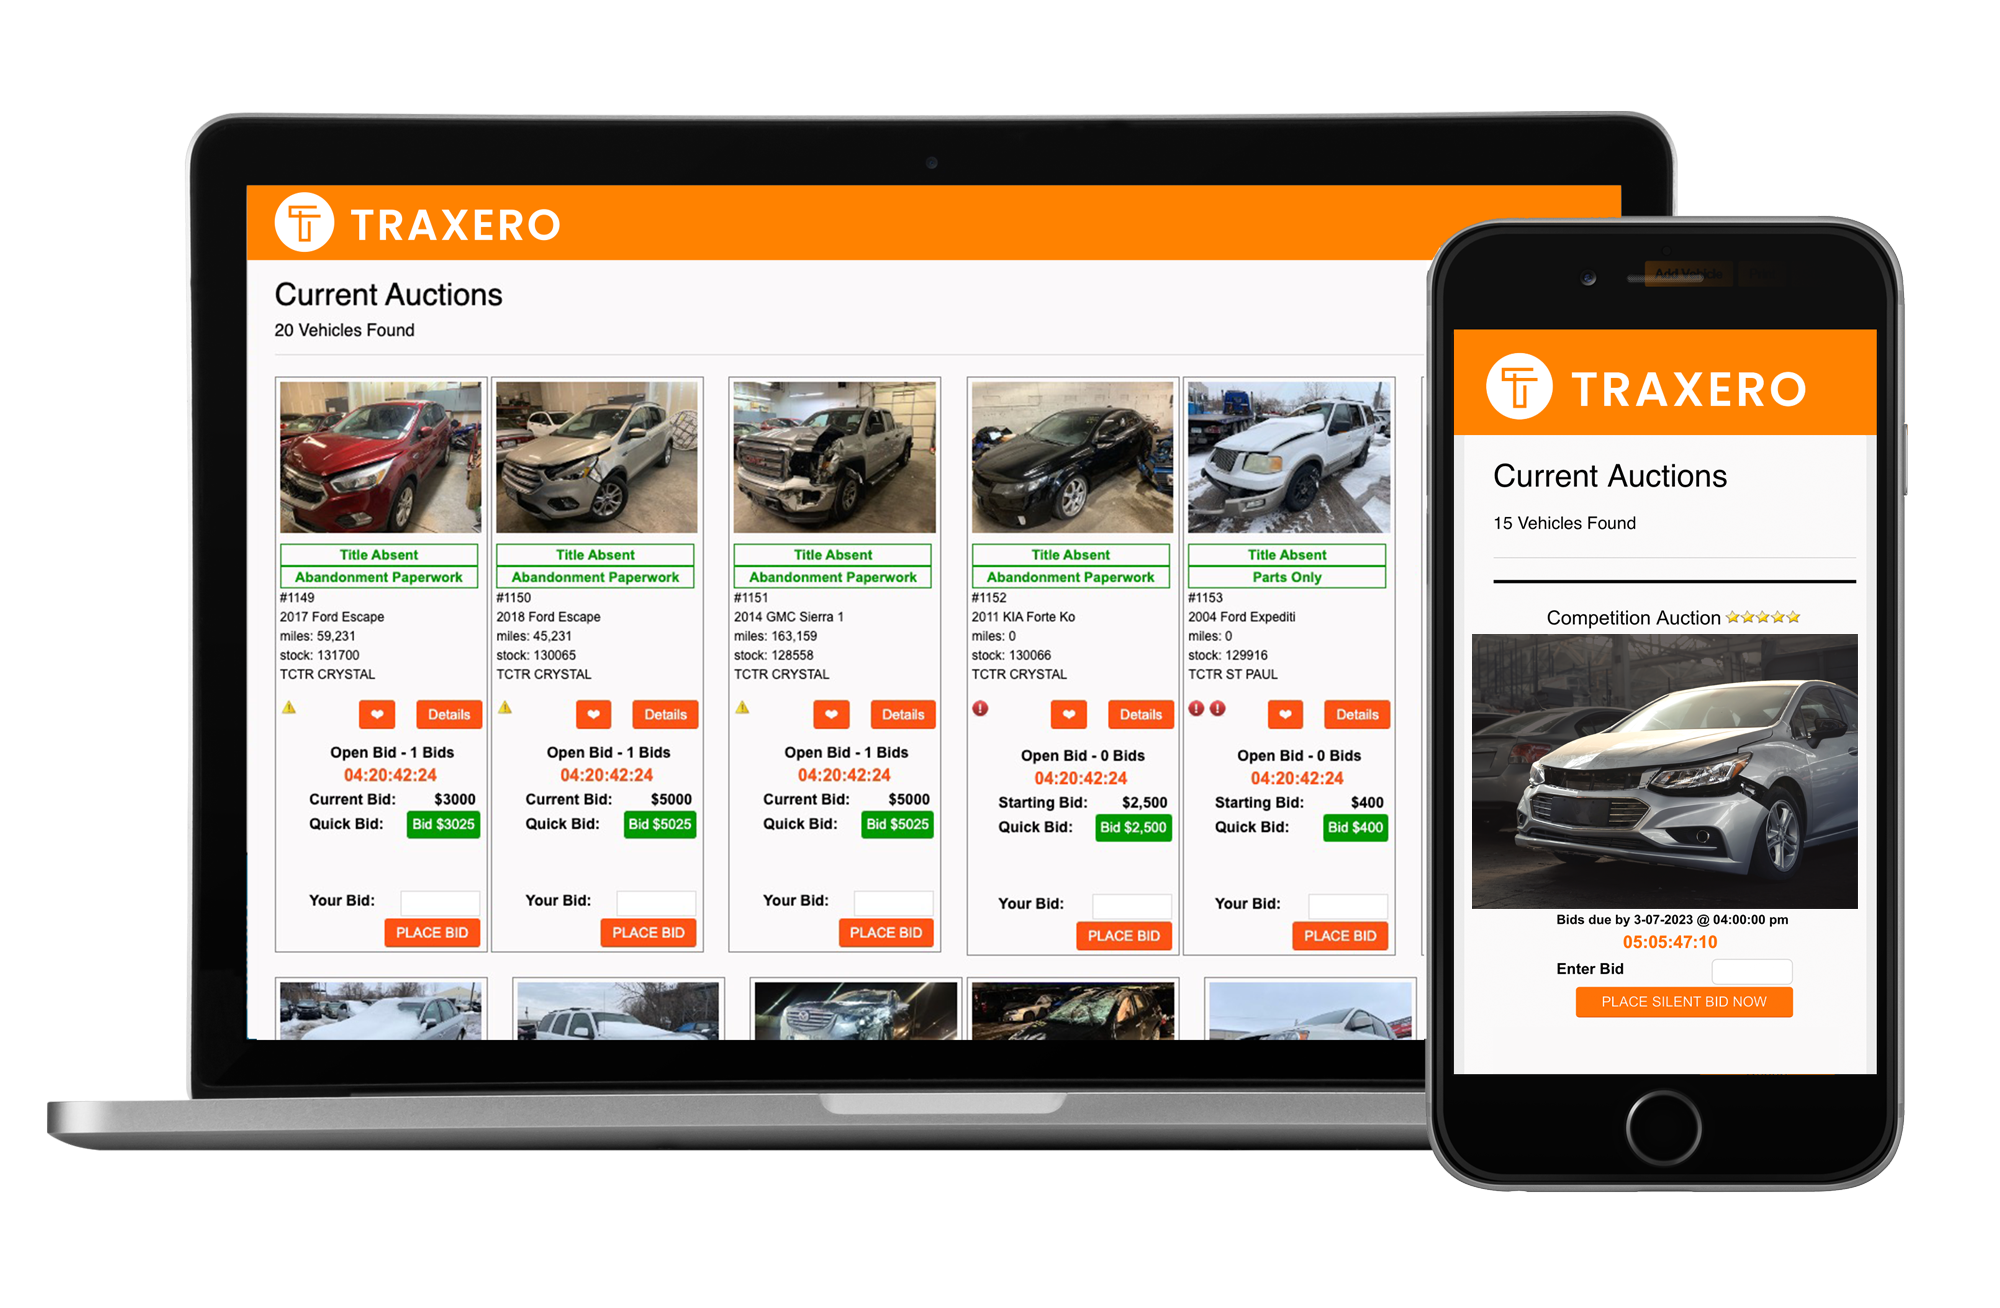 Selling Wrecked And Abandoned Cars Is Easy With Auction Simplified From TRAXERO